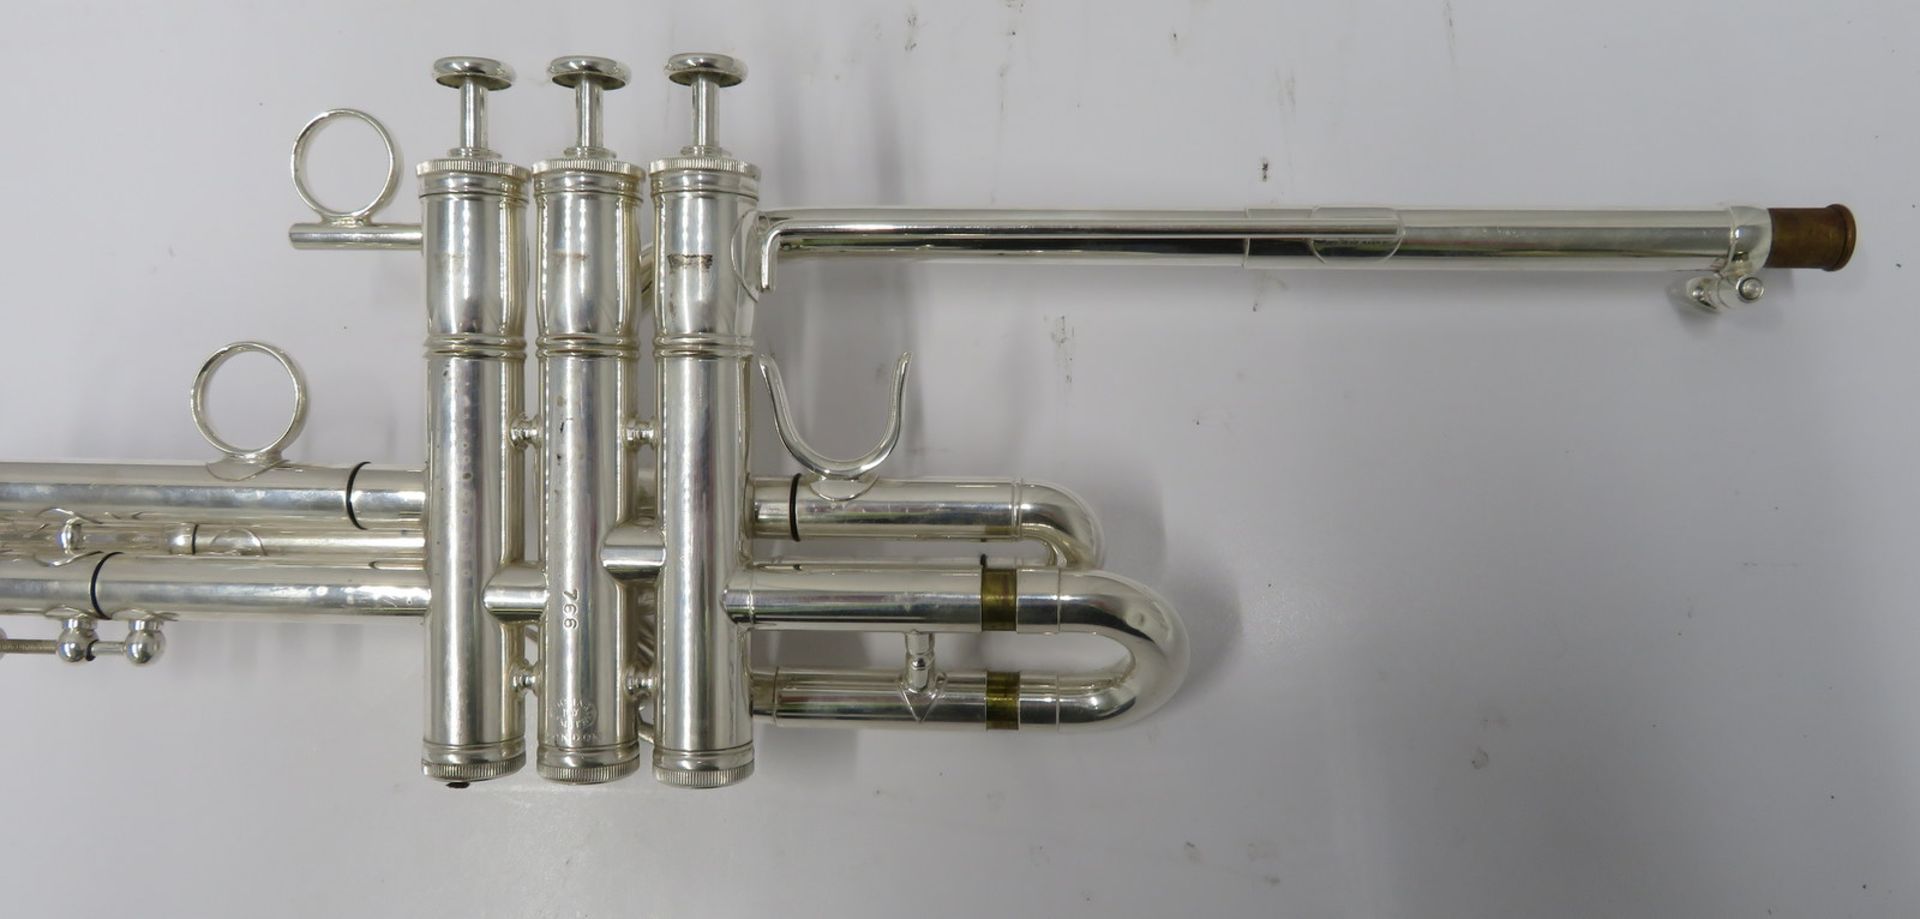 Smith-Watkins fanfare trumpet with case. Serial number: 766. - Image 4 of 14